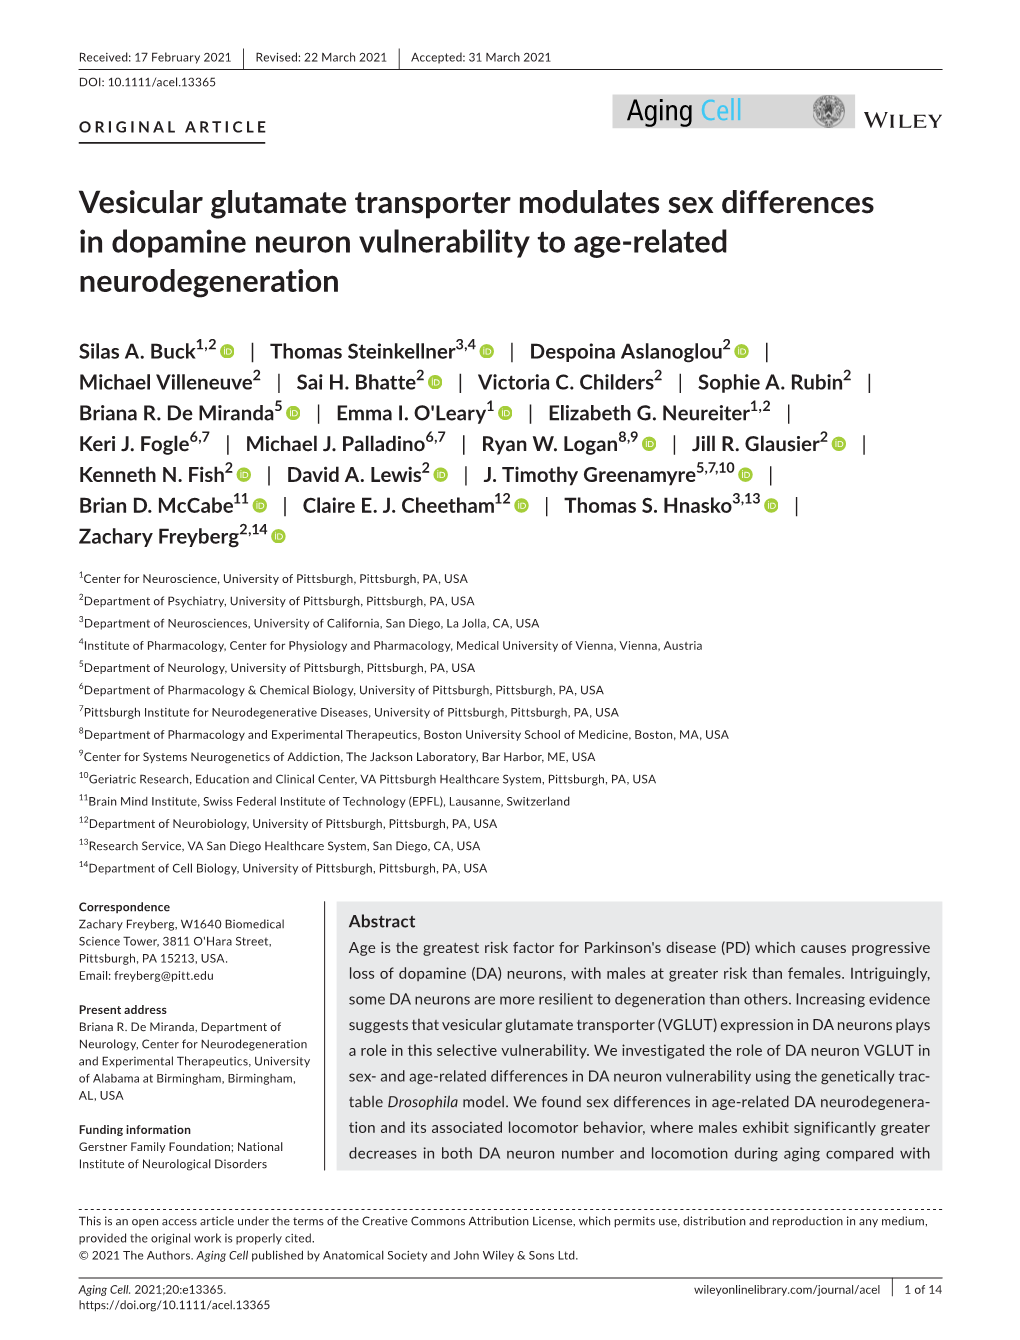 Vesicular Glutamate Transporter Modulates Sex Differences in Dopamine Neuron Vulnerability to Age&#X02010